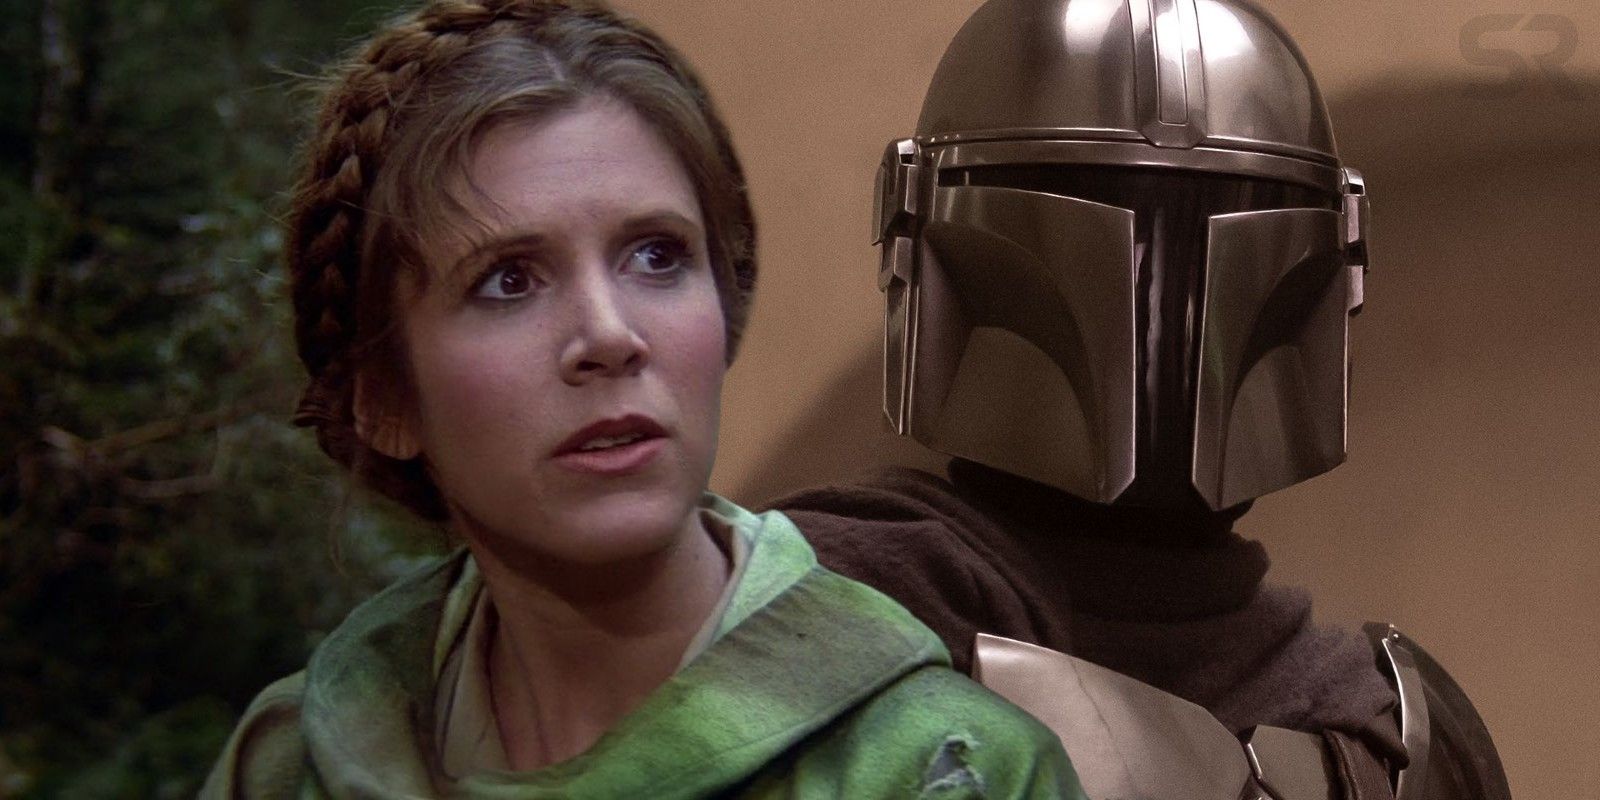 Where The Star Wars Original Trilogy Characters Are During The Mandalorian